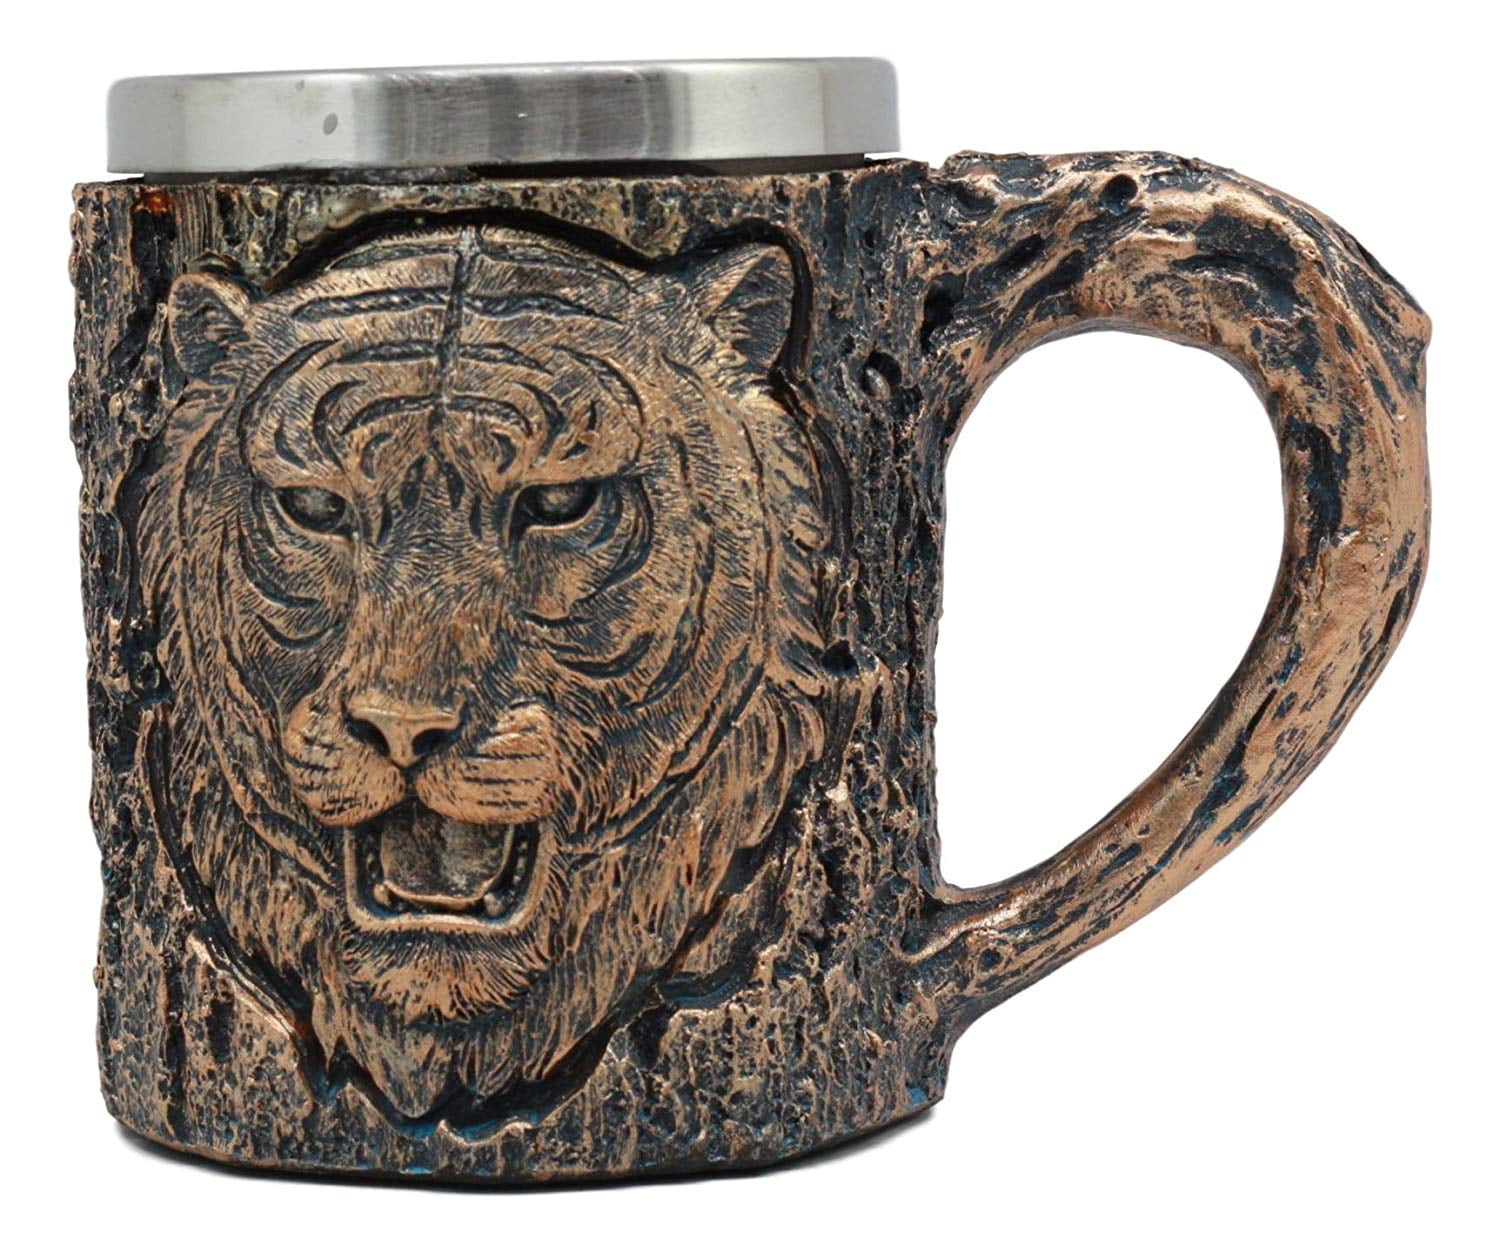 Ebros Nature Wild Bison Mug with Rustic Tree Bark Texture Design in Painted Bronze Finish 12oz Drink Beer Stein Tankard Coffee Cup